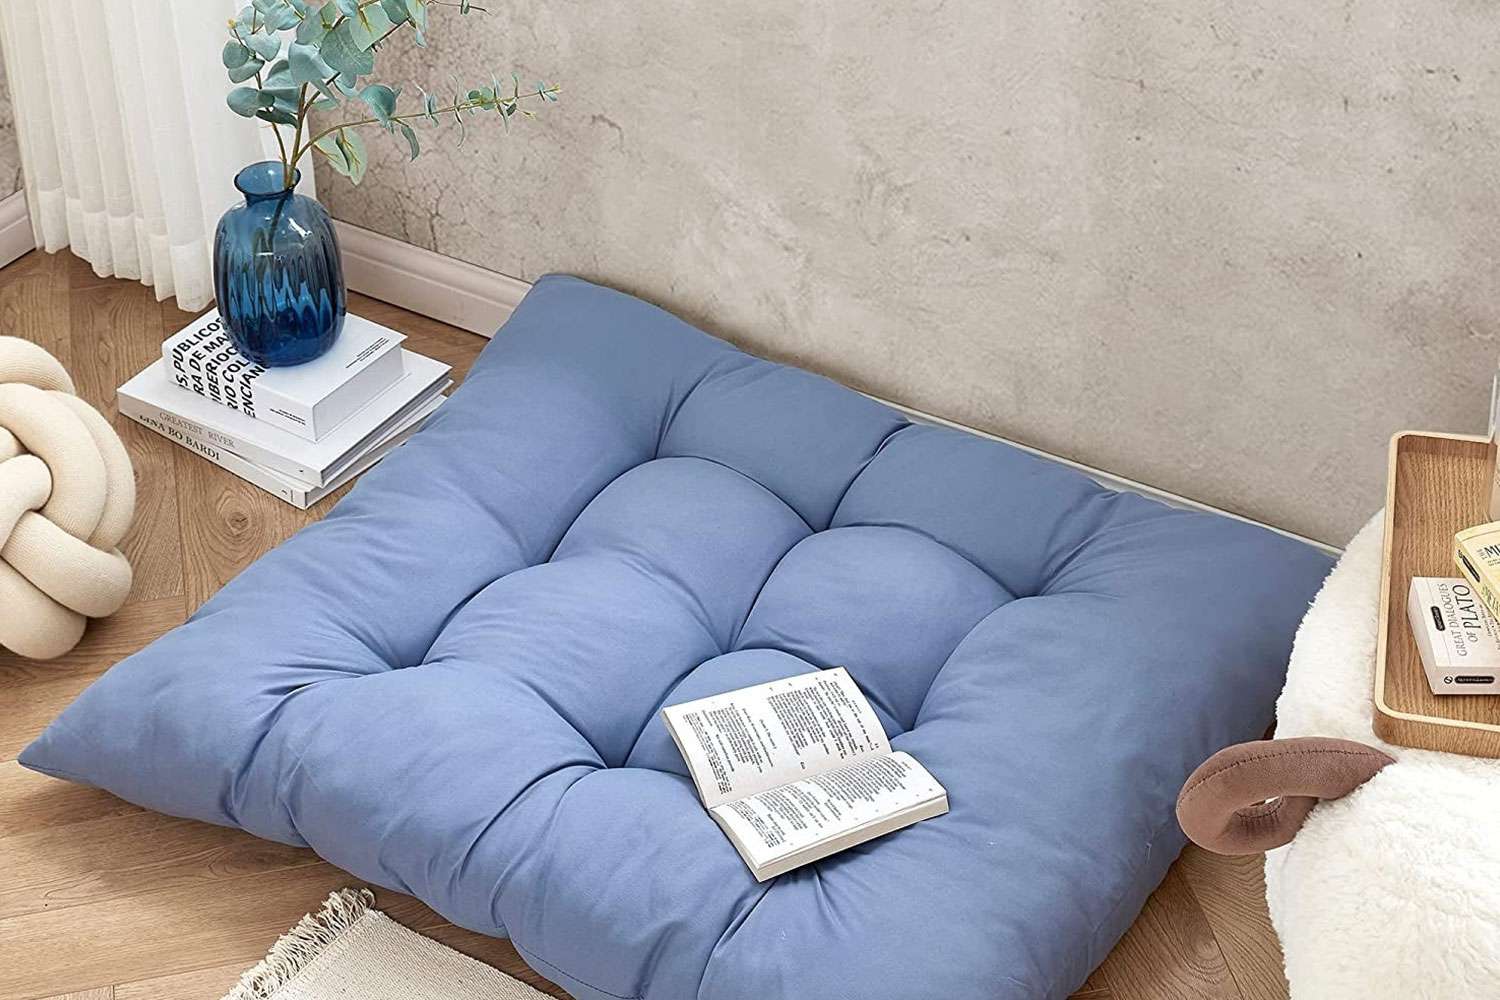 Square Thick Floor Seating Cushions,Solid Thick Tufted Cushion Meditation  Pillow for Sitting on Floor,Tatami Pad for Guests or Kids Reading,Yoga